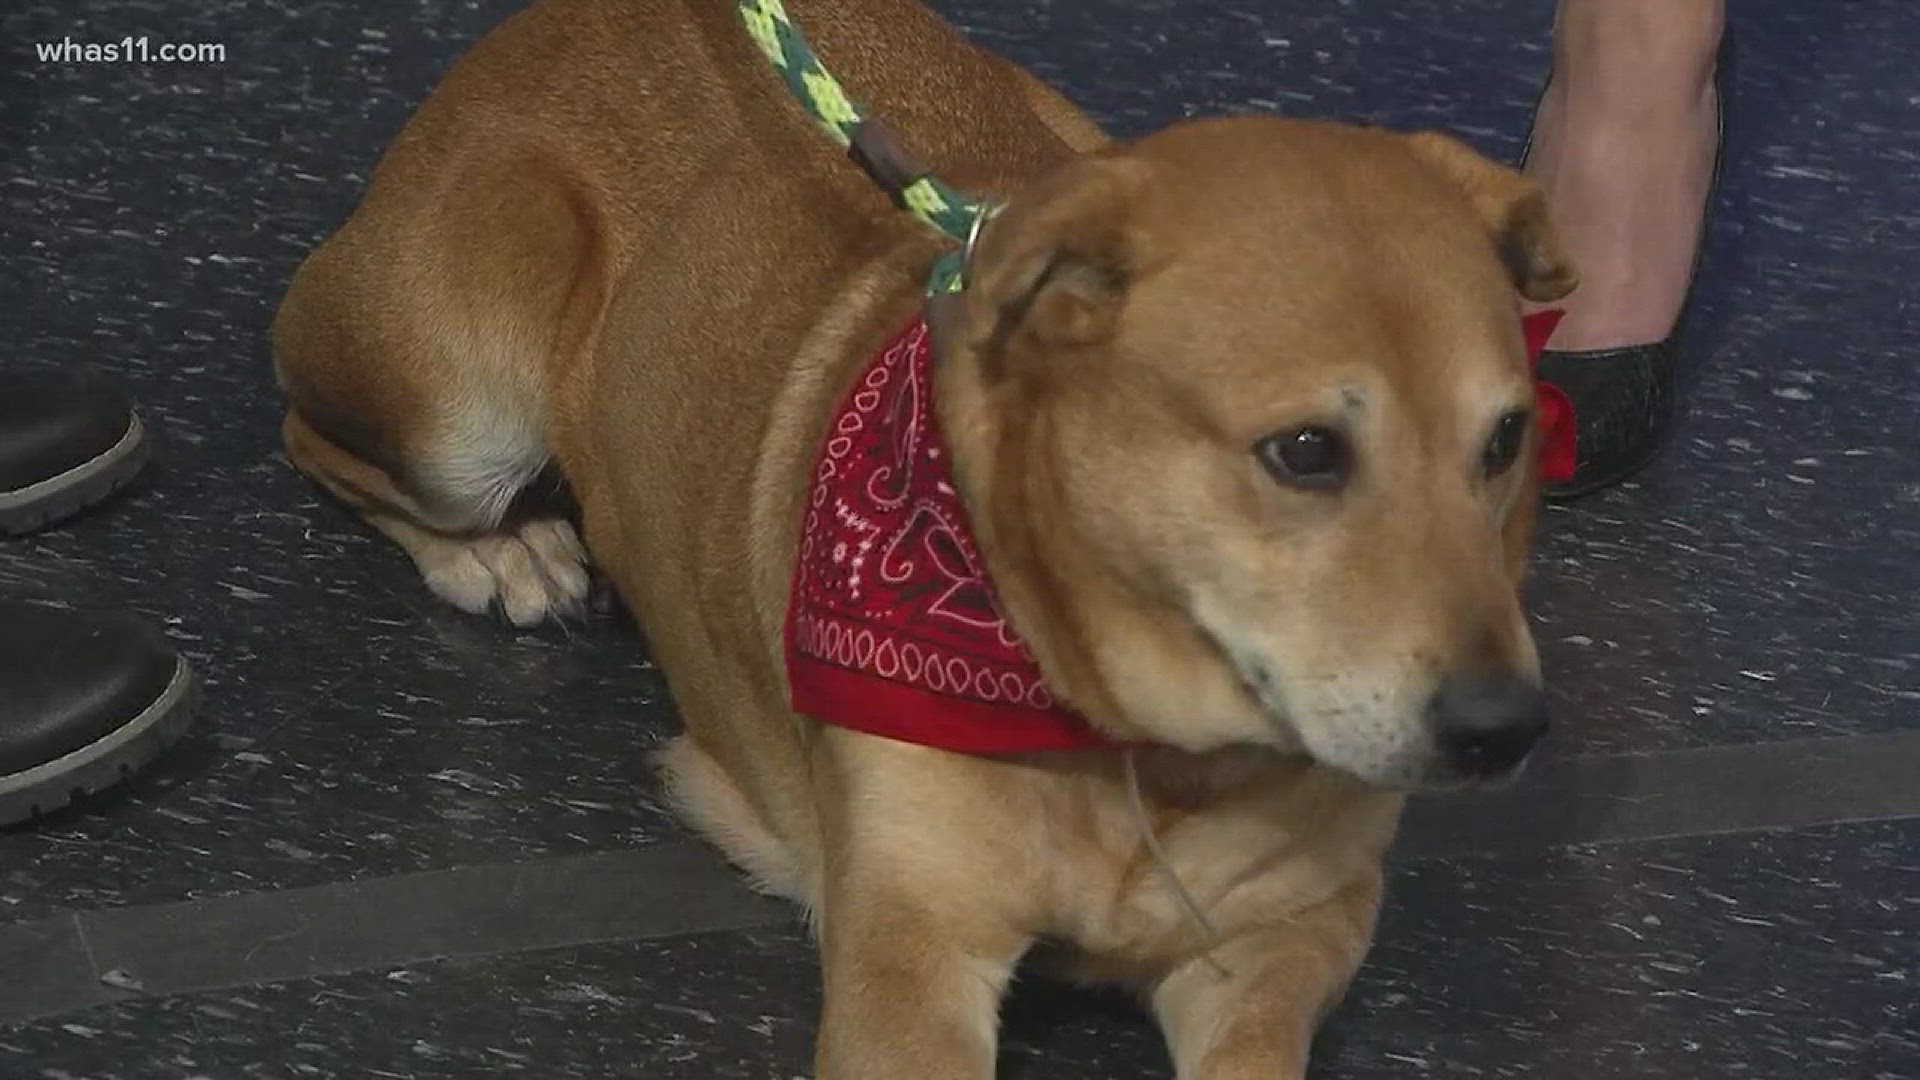 Louisville Metro Animal Services says Beanie is ready for a good home.